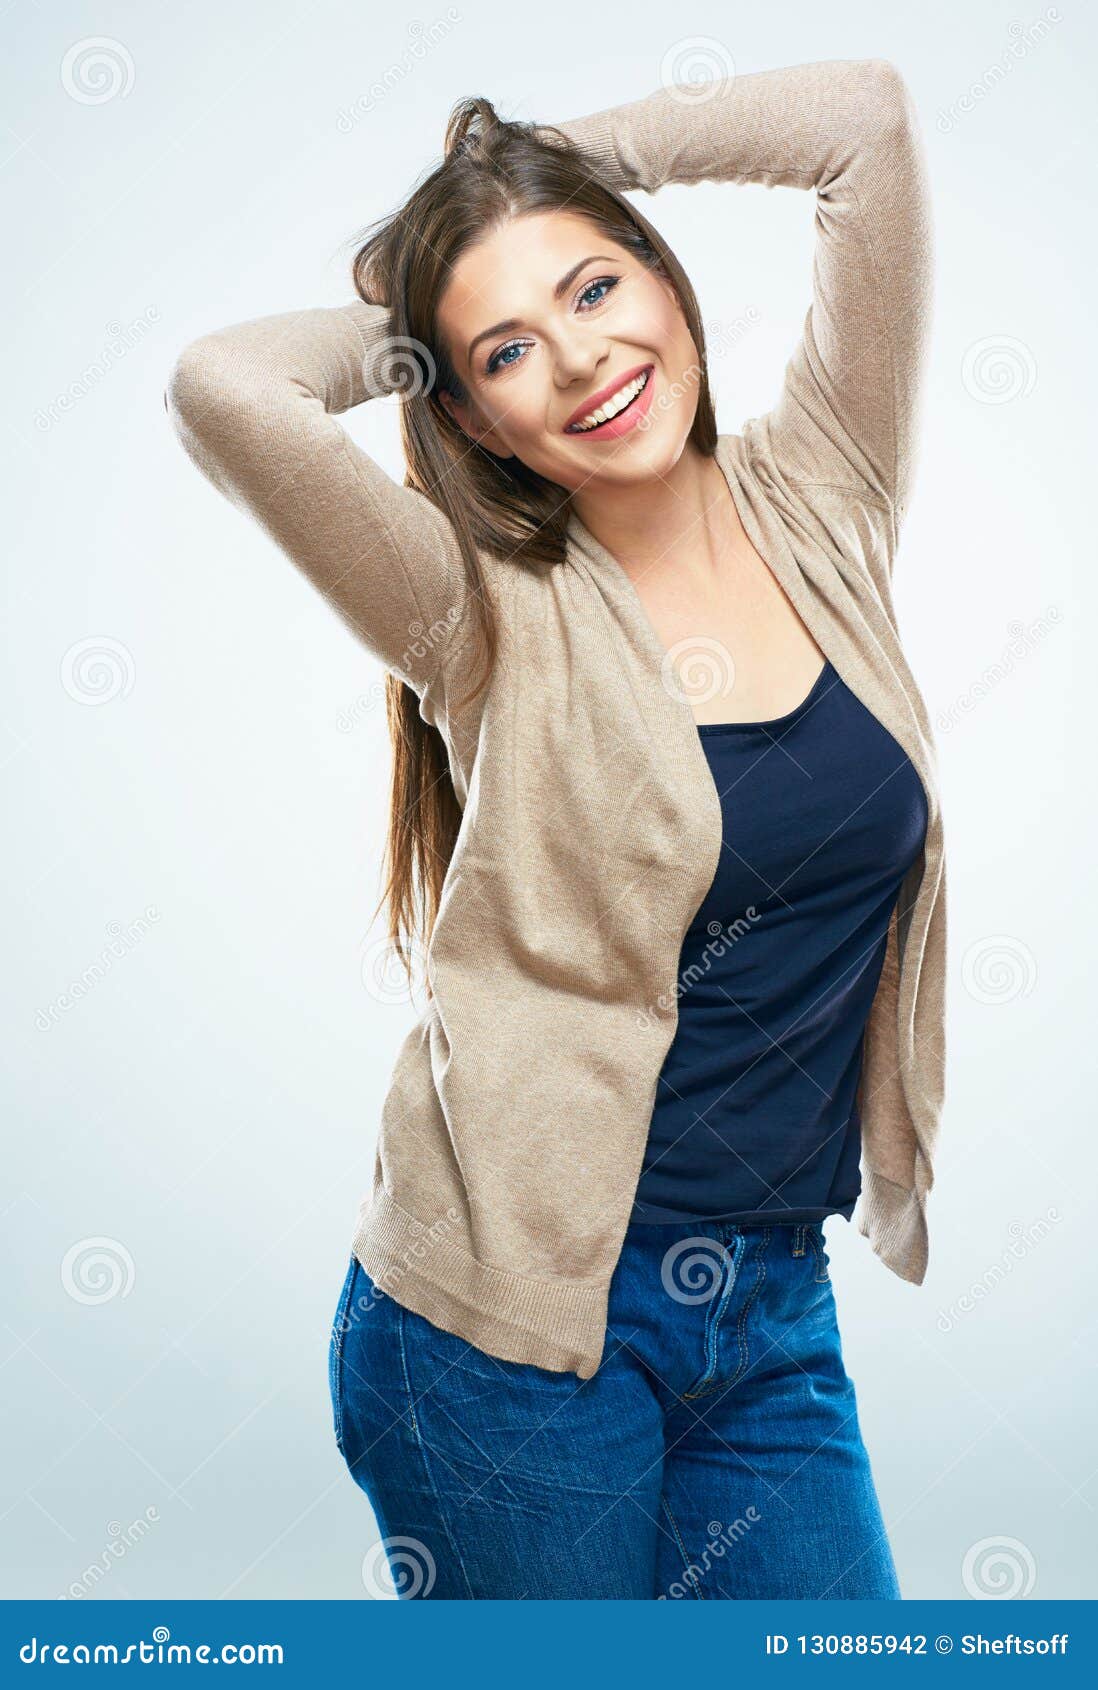 Girl Holds Hands Folded Behind Head. Stock Photo - Image of casual ...